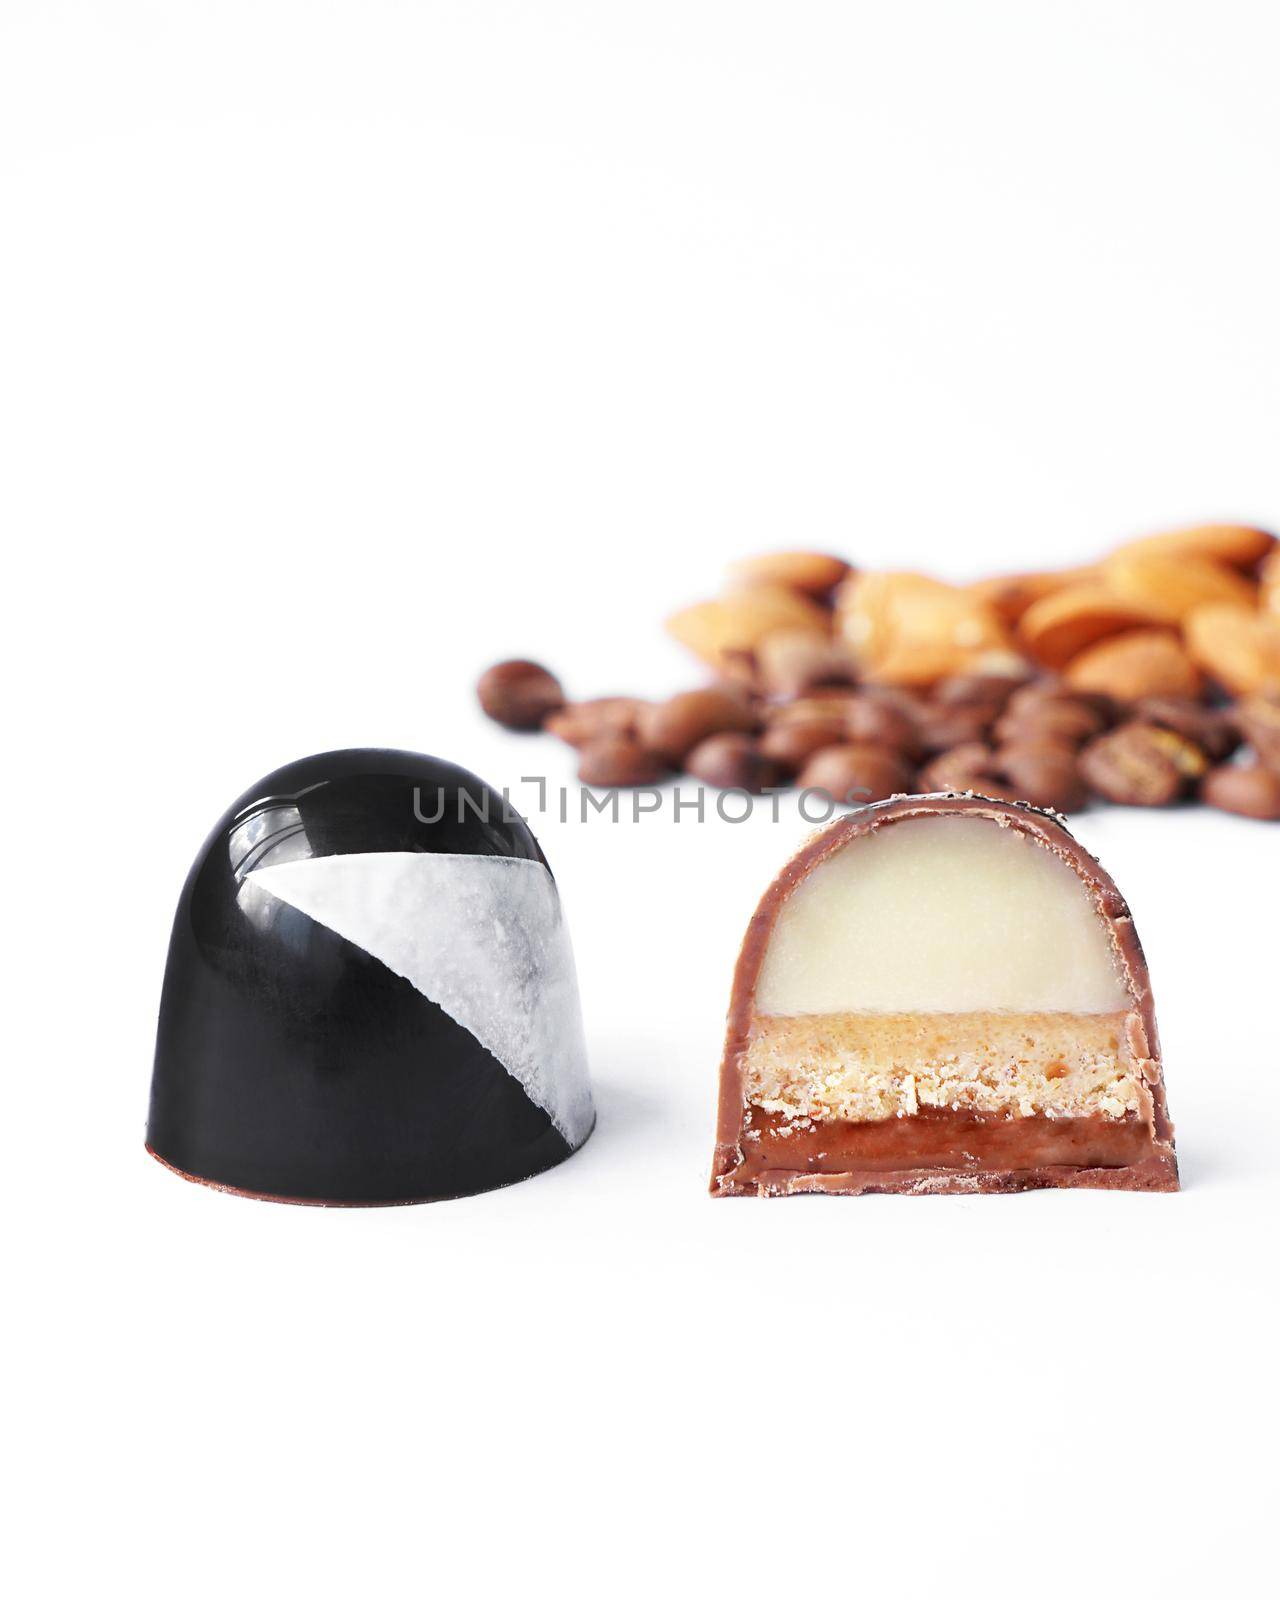 Black chocolate and cutaway candy. Coffee and almond filling. Handmade. Sweets on a white background, vertical photo